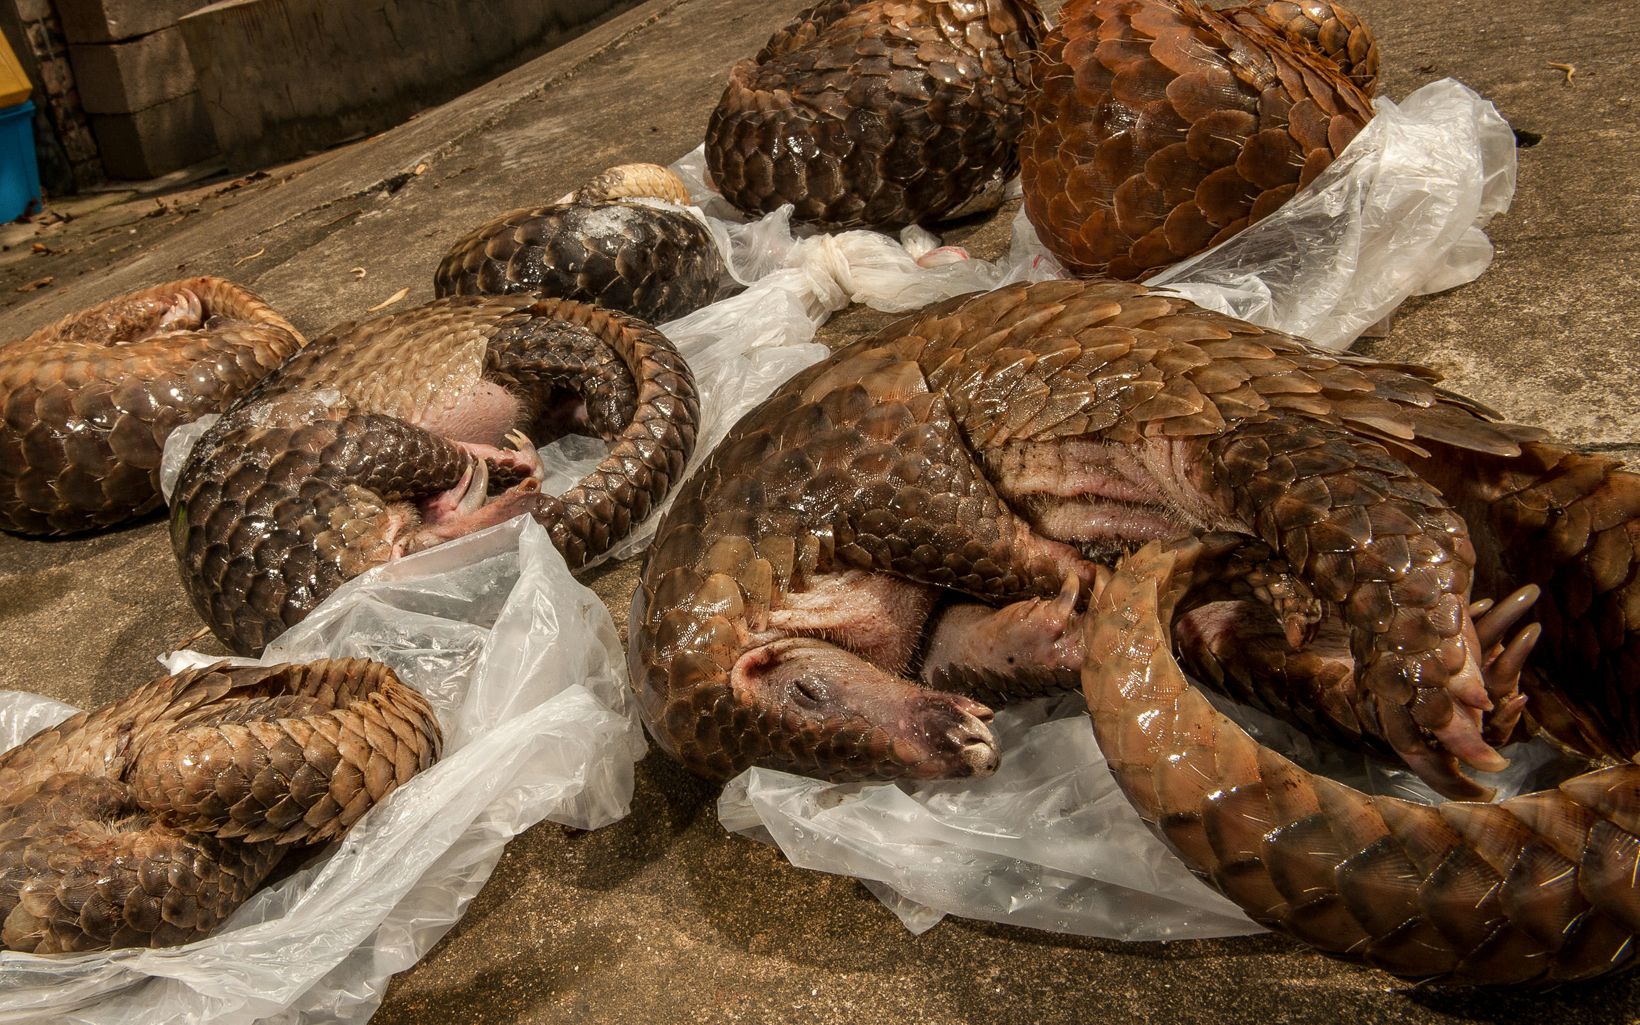 There is a false belief that pangolin blood is a healing tonic. No one knows how many of these heavily trafficked animals are left in the wild.